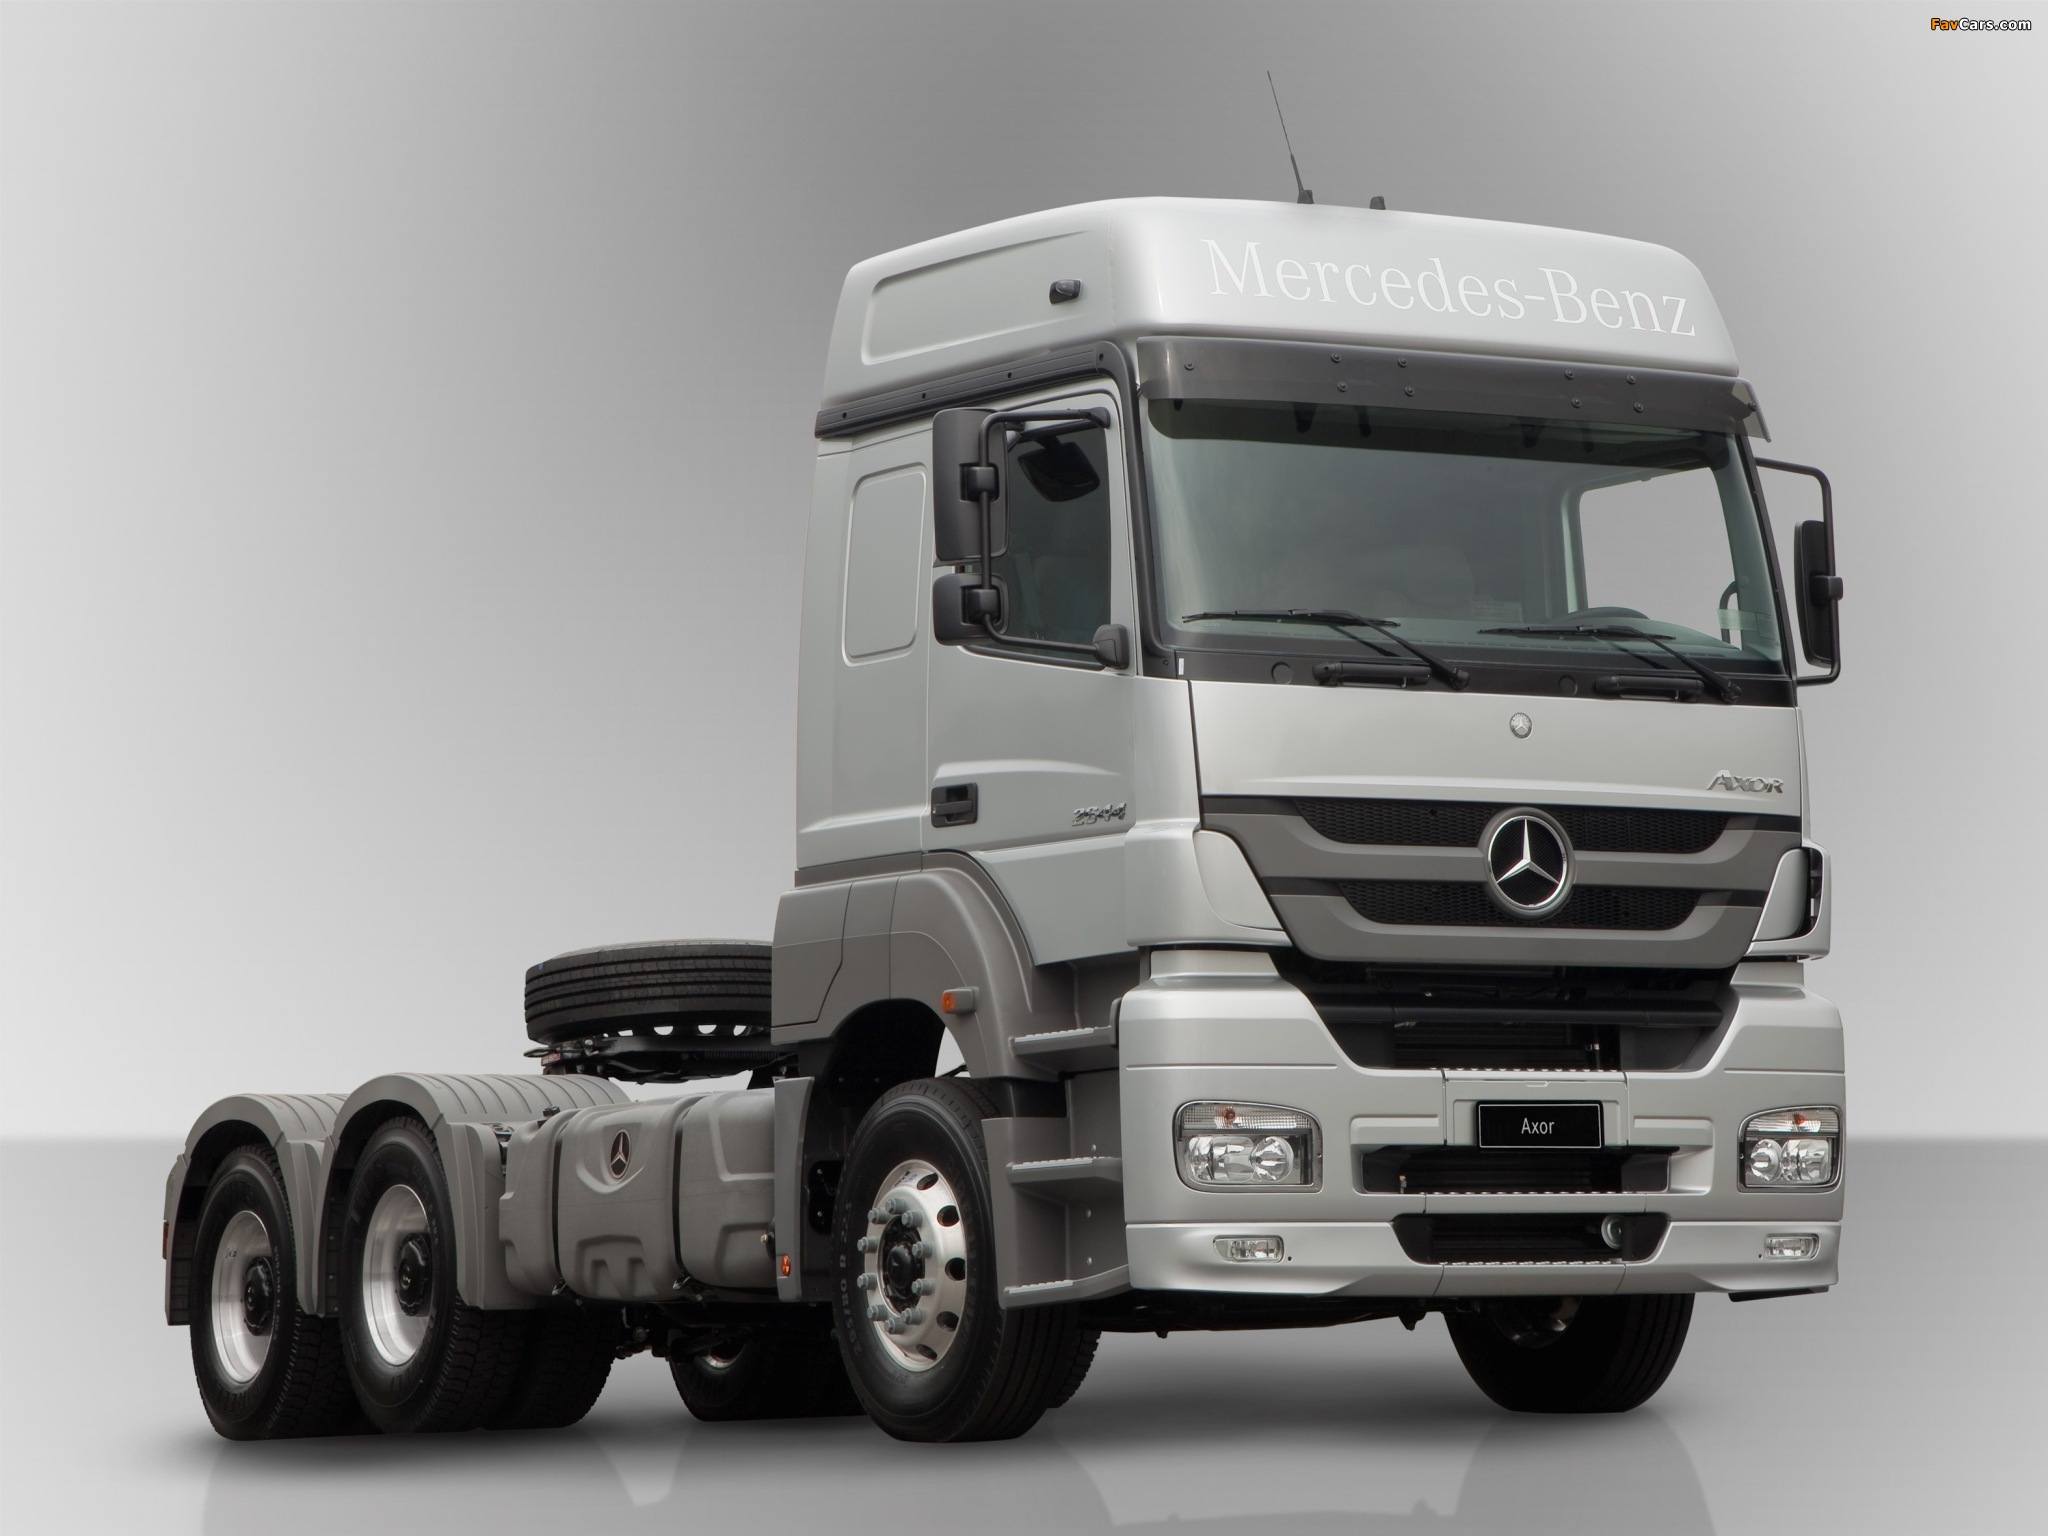 High Quality Tuning Files Mercedes-Benz Axor  2533 326hp